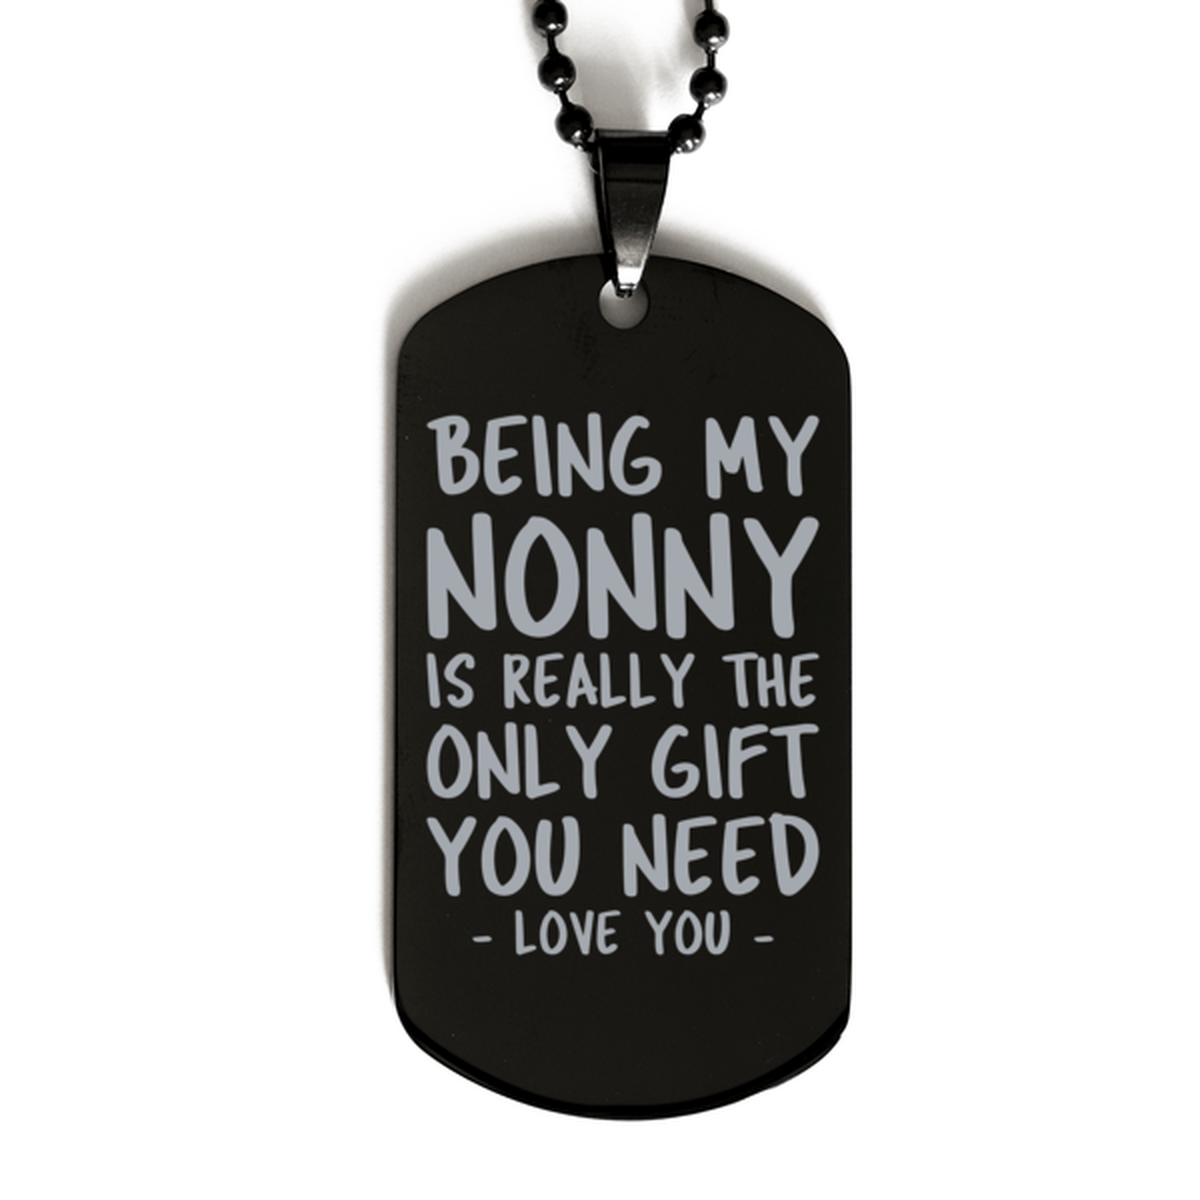 Funny Nonny Black Dog Tag Necklace, Being My Nonny Is Really the Only Gift You Need, Best Birthday Gifts for Nonny